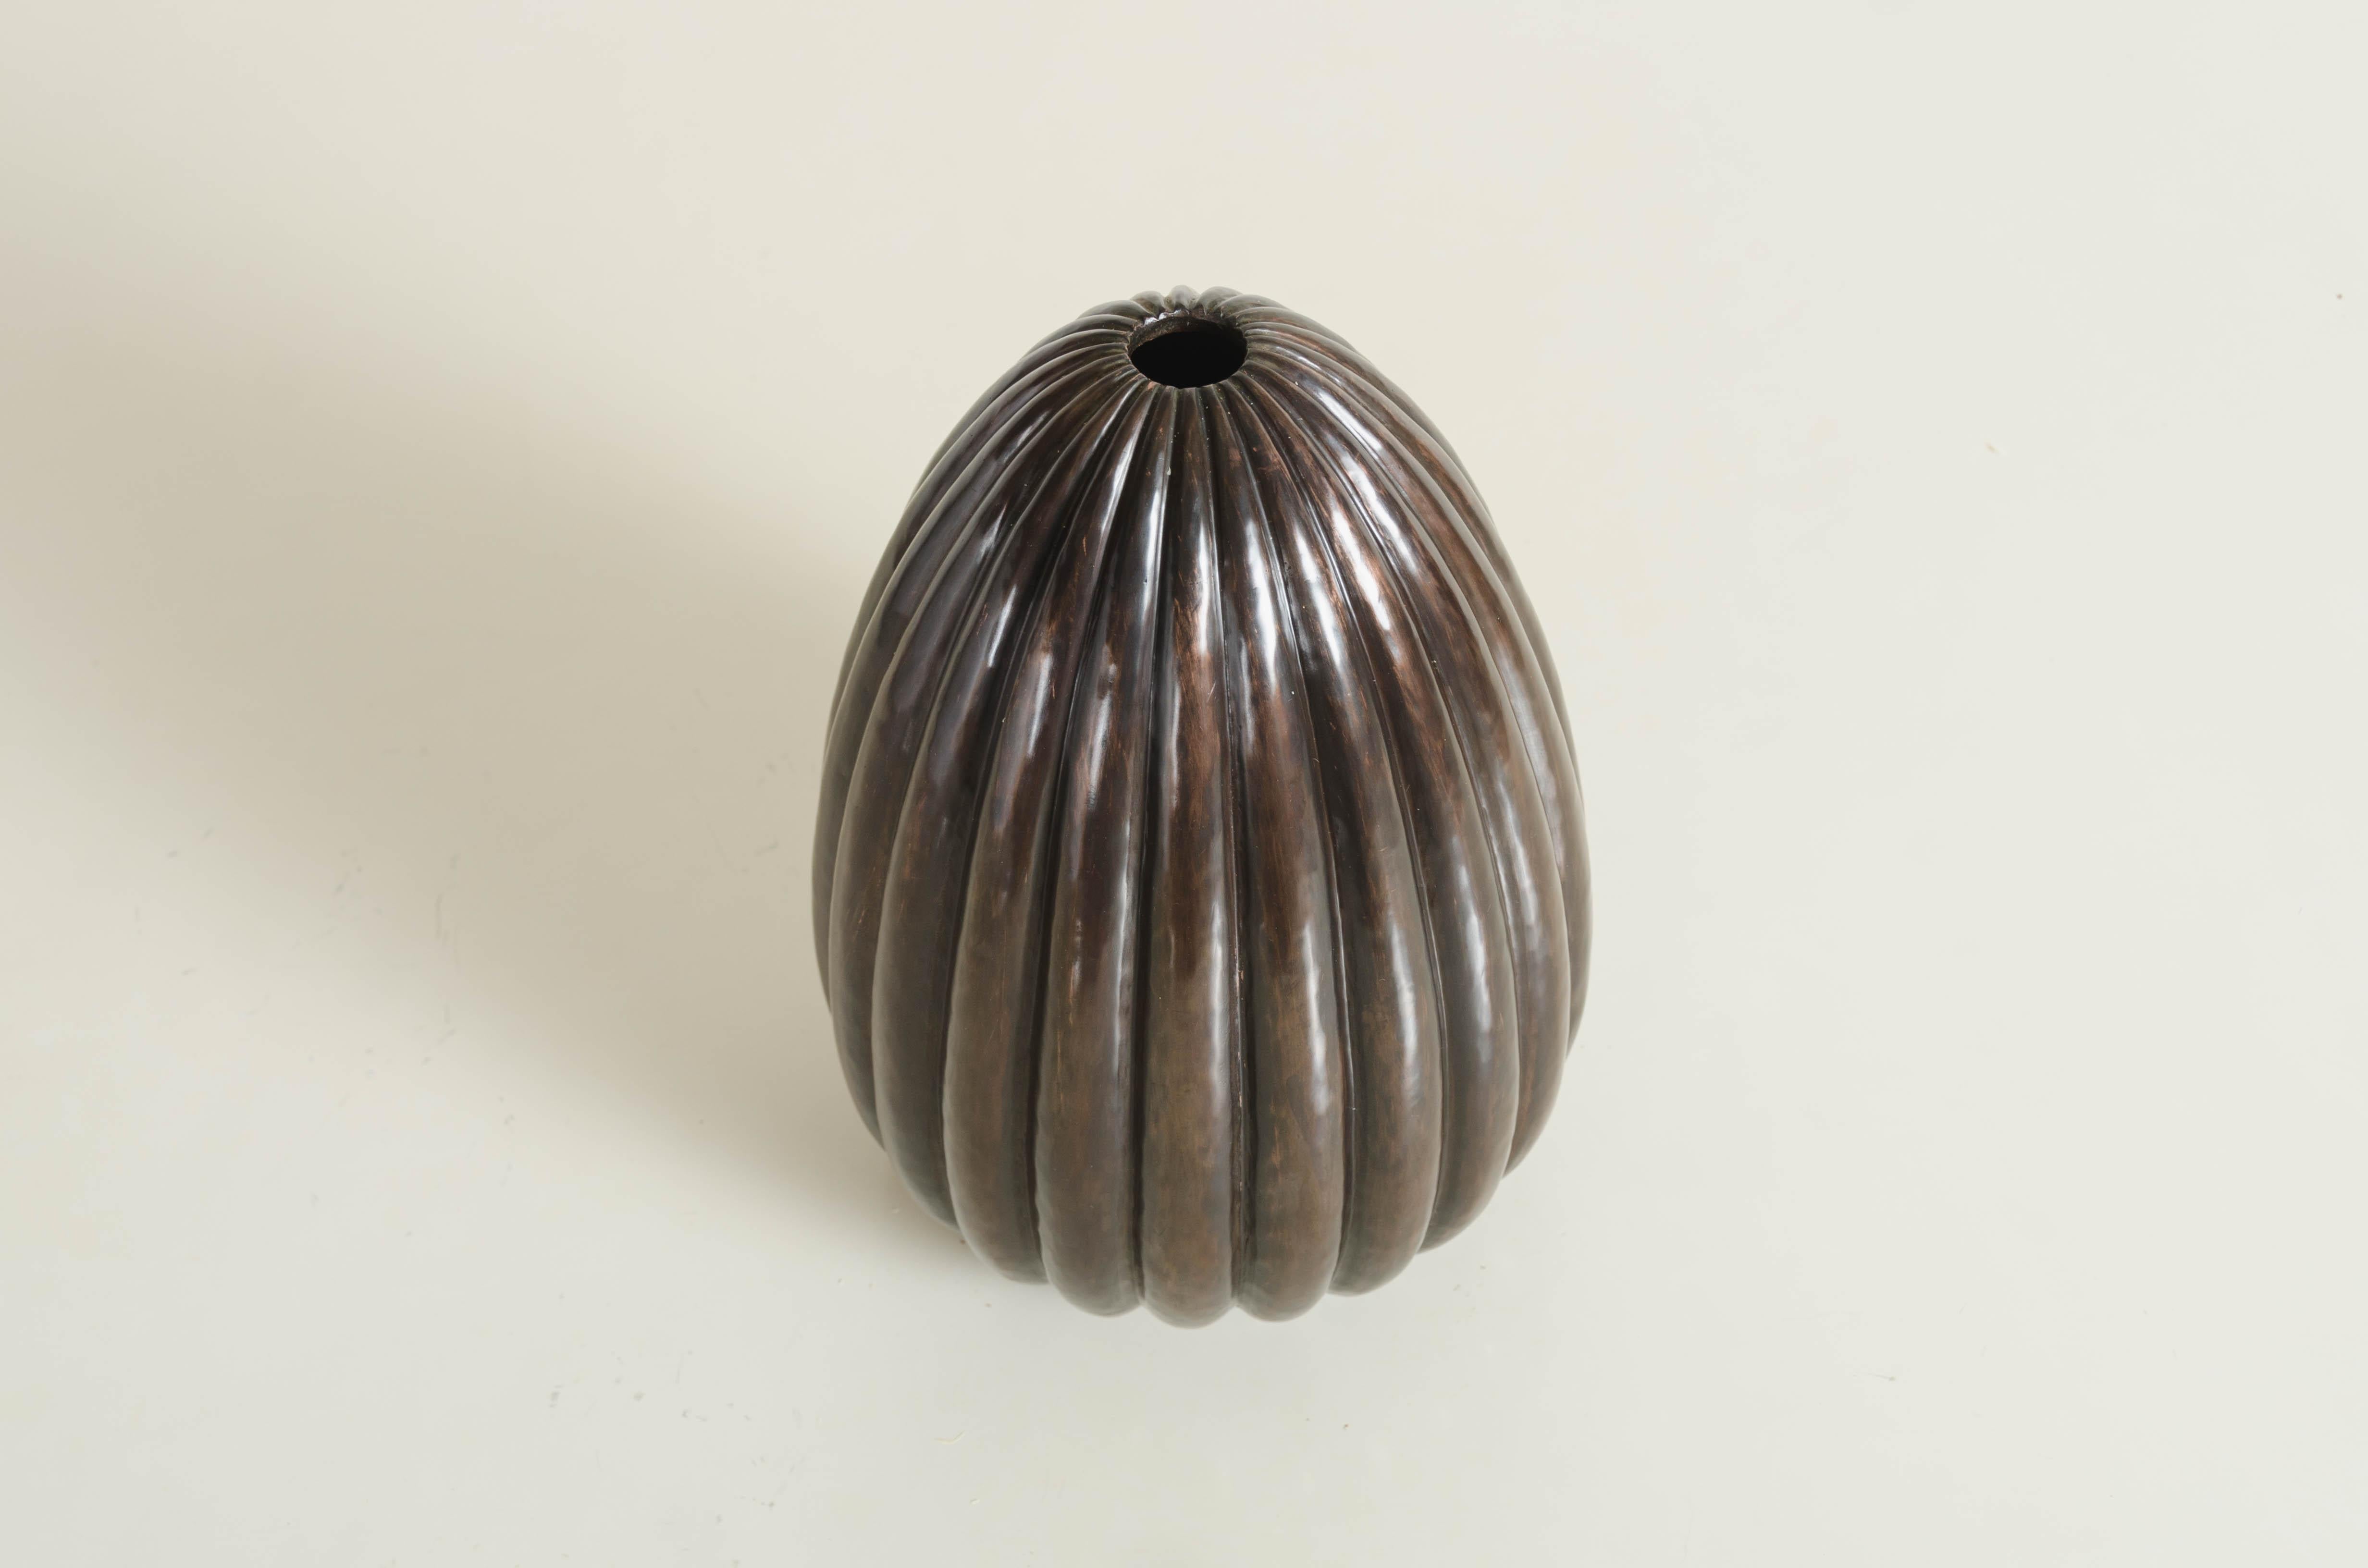 American Lobed Vase in Antique Copper by Robert Kuo, Limited Edition For Sale